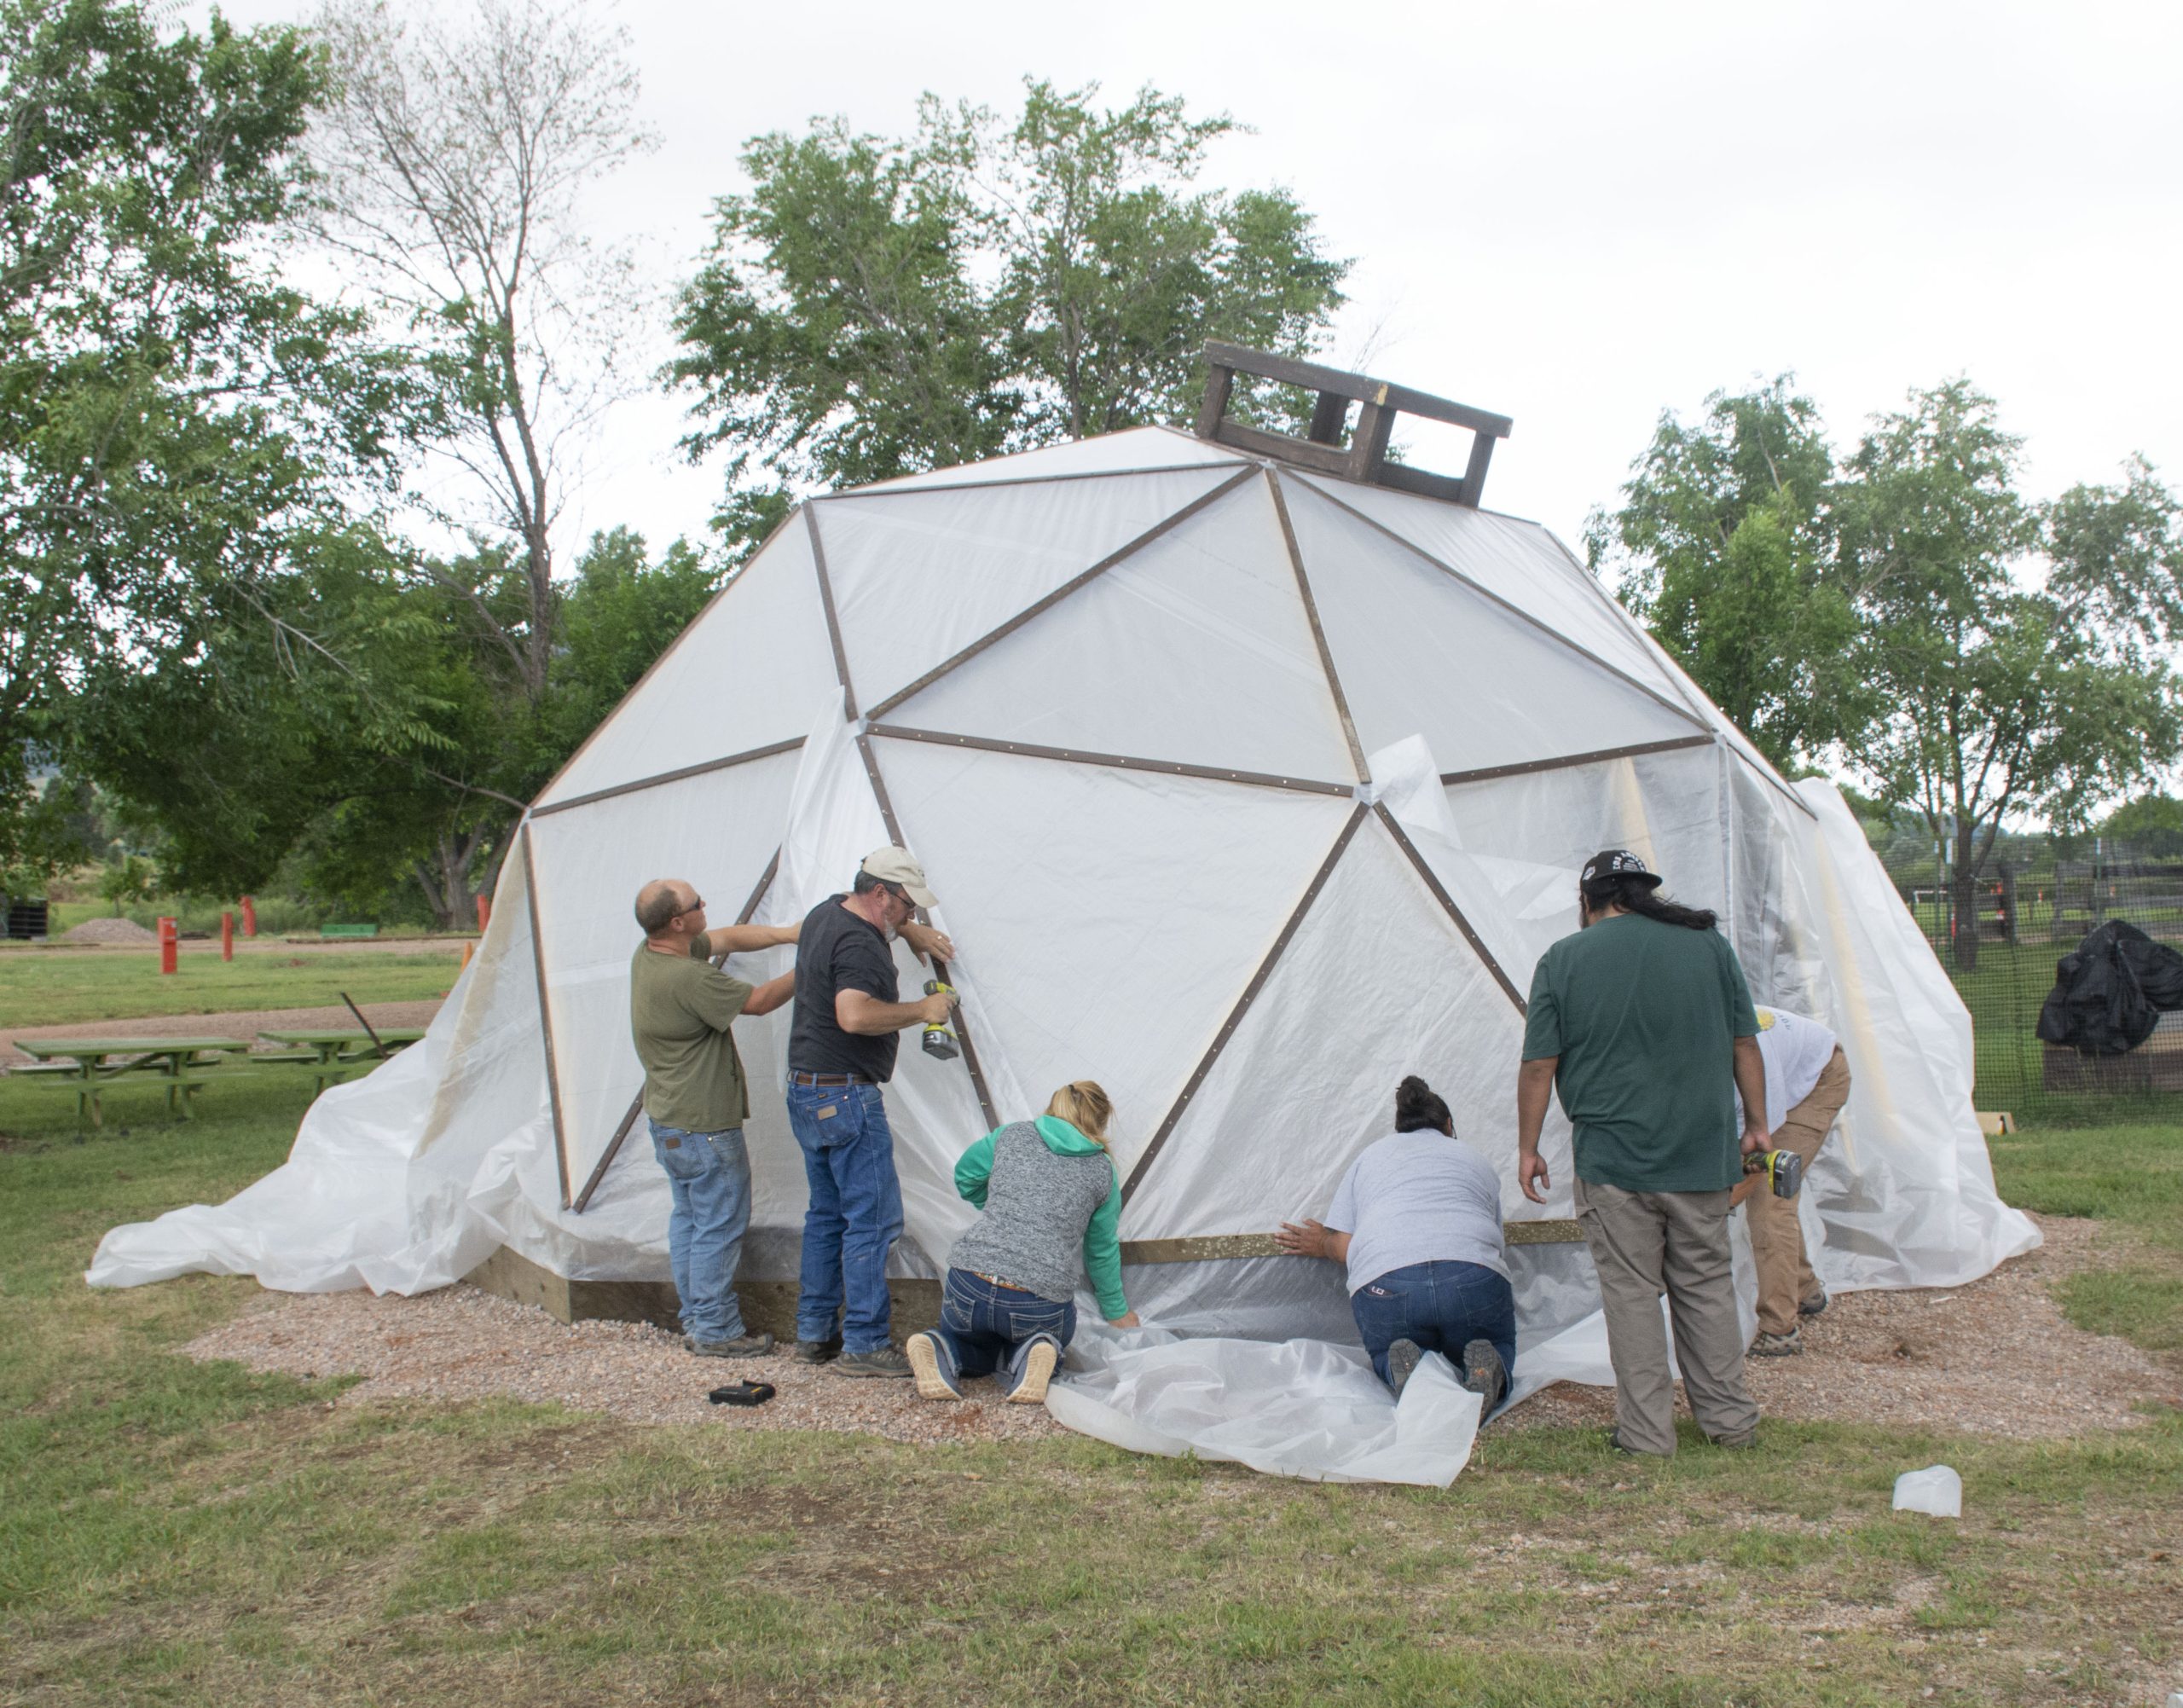 UW Extension to Offer Weeklong Geodesic Dome School in Laramie – AgNews